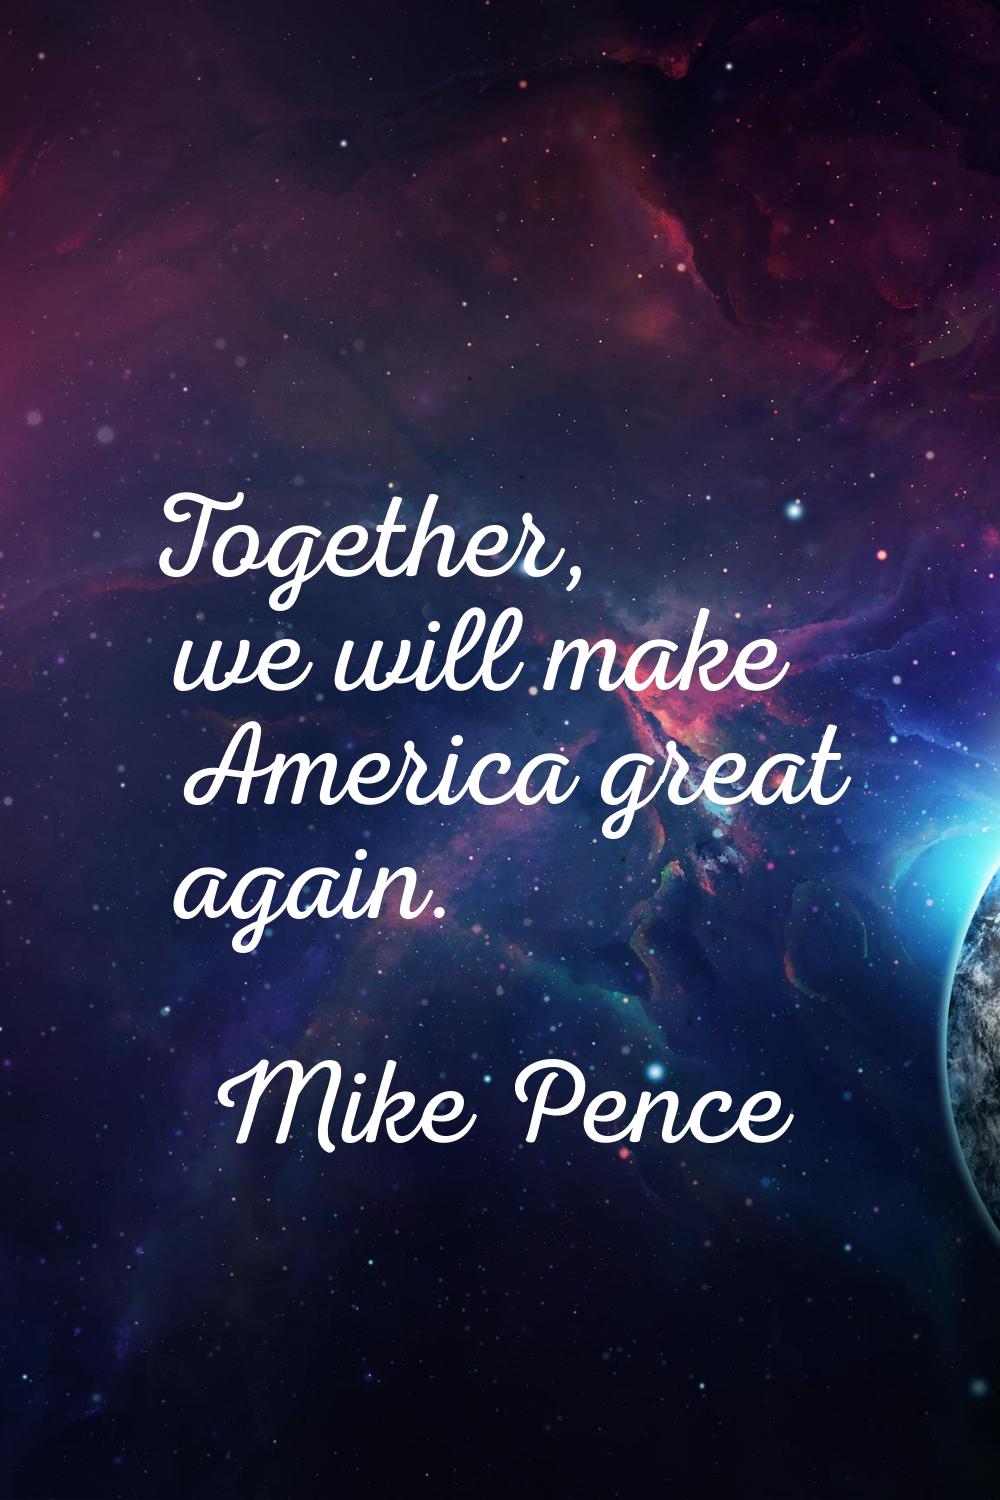 Together, we will make America great again.